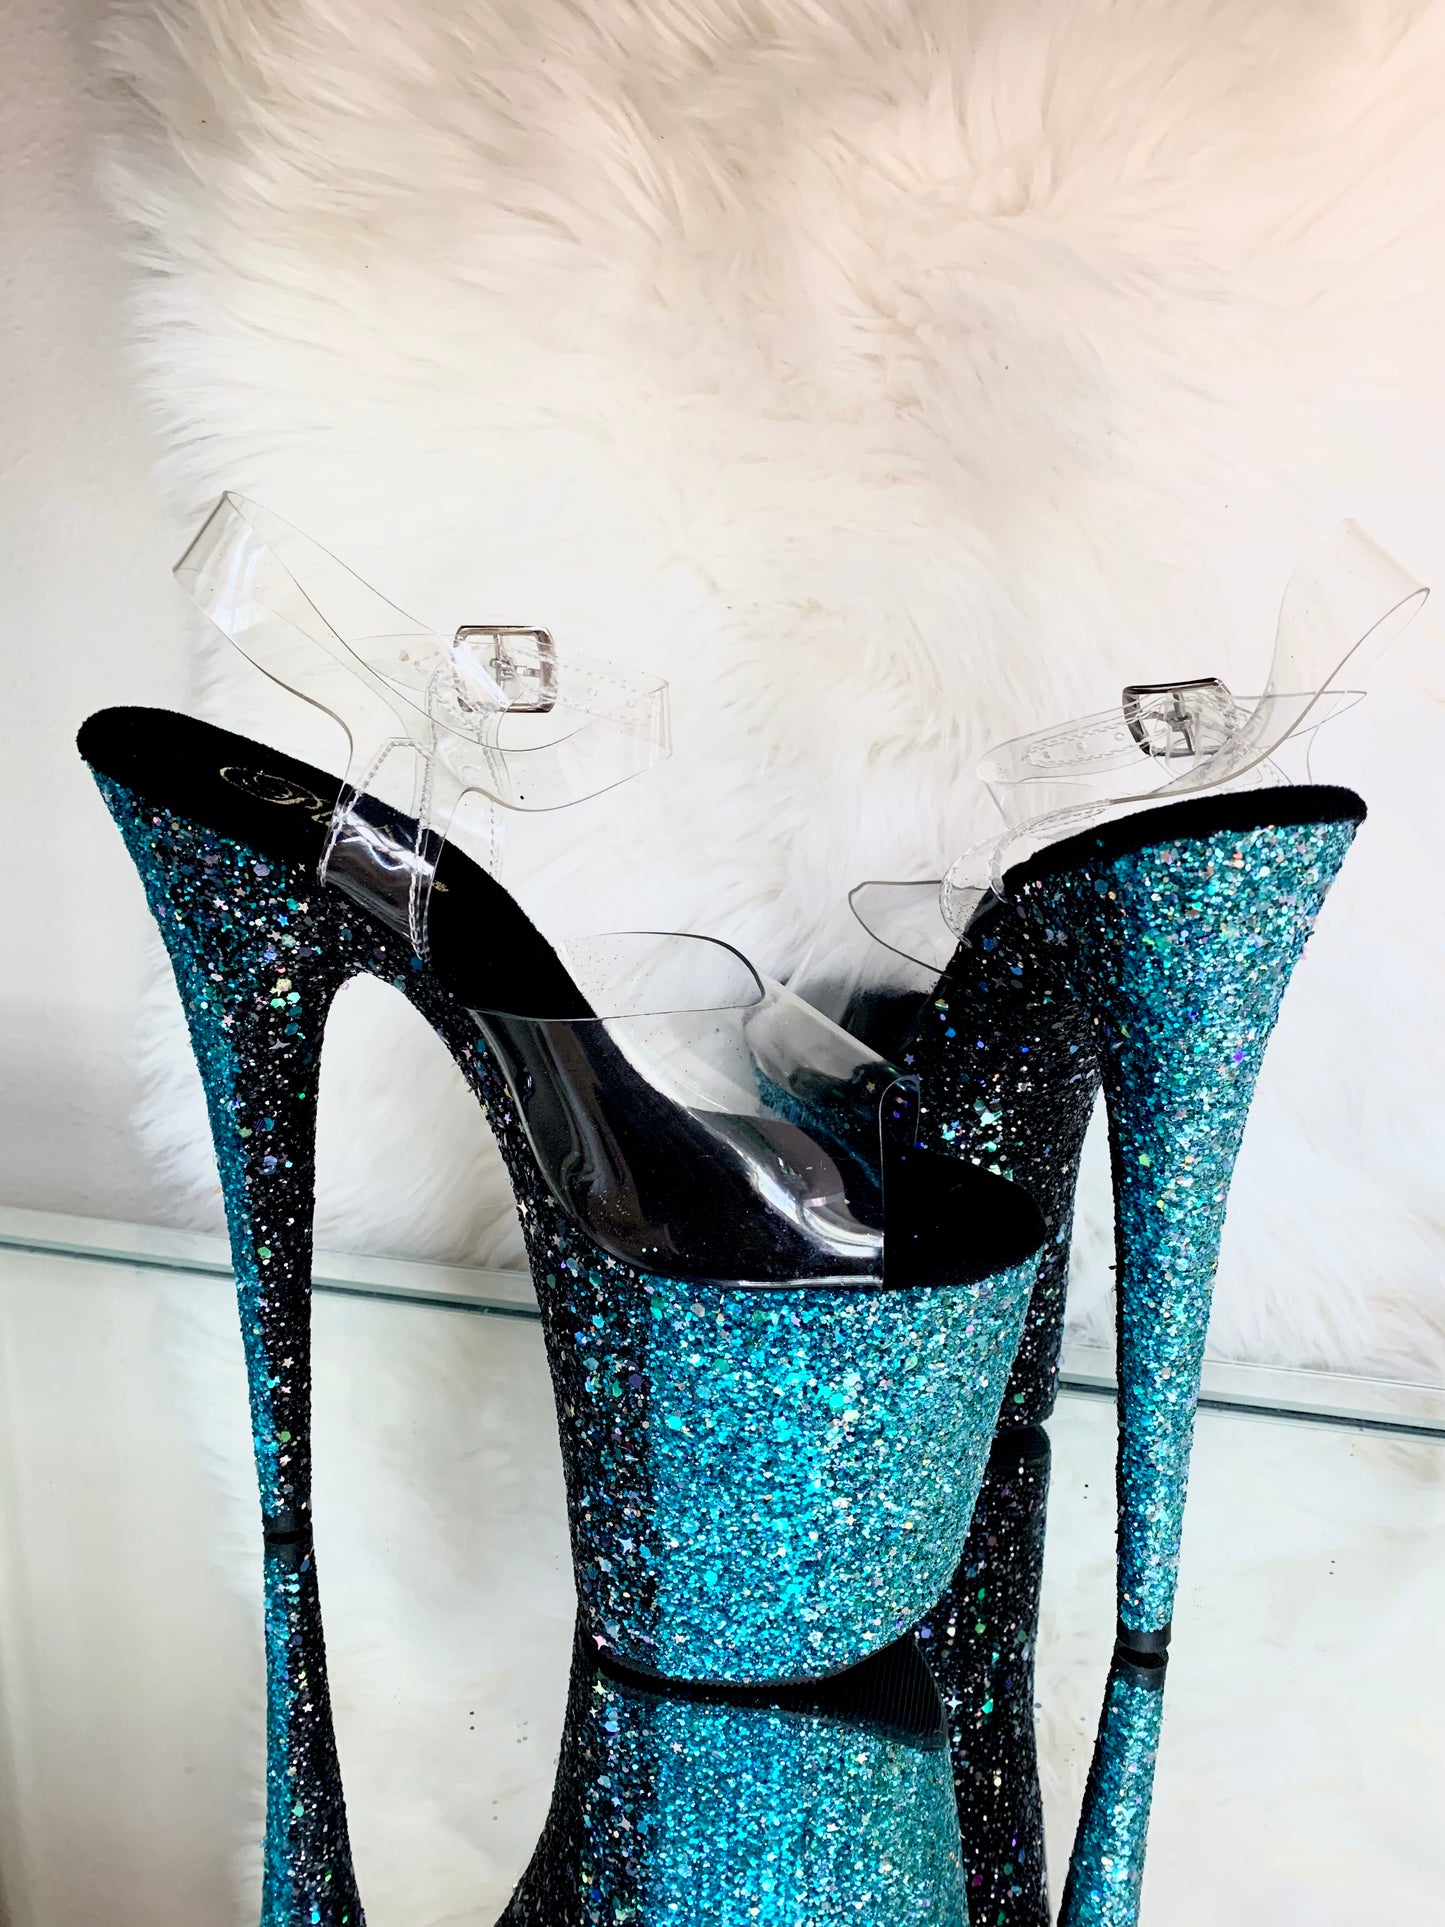 Platform heels with clear straps, and dual Ombre with turquoise and black glitter. Shades of turquoise starting at the front of the platform, and back of the heels, blending to black under the arch, and down the inside of the heels. Black soles.